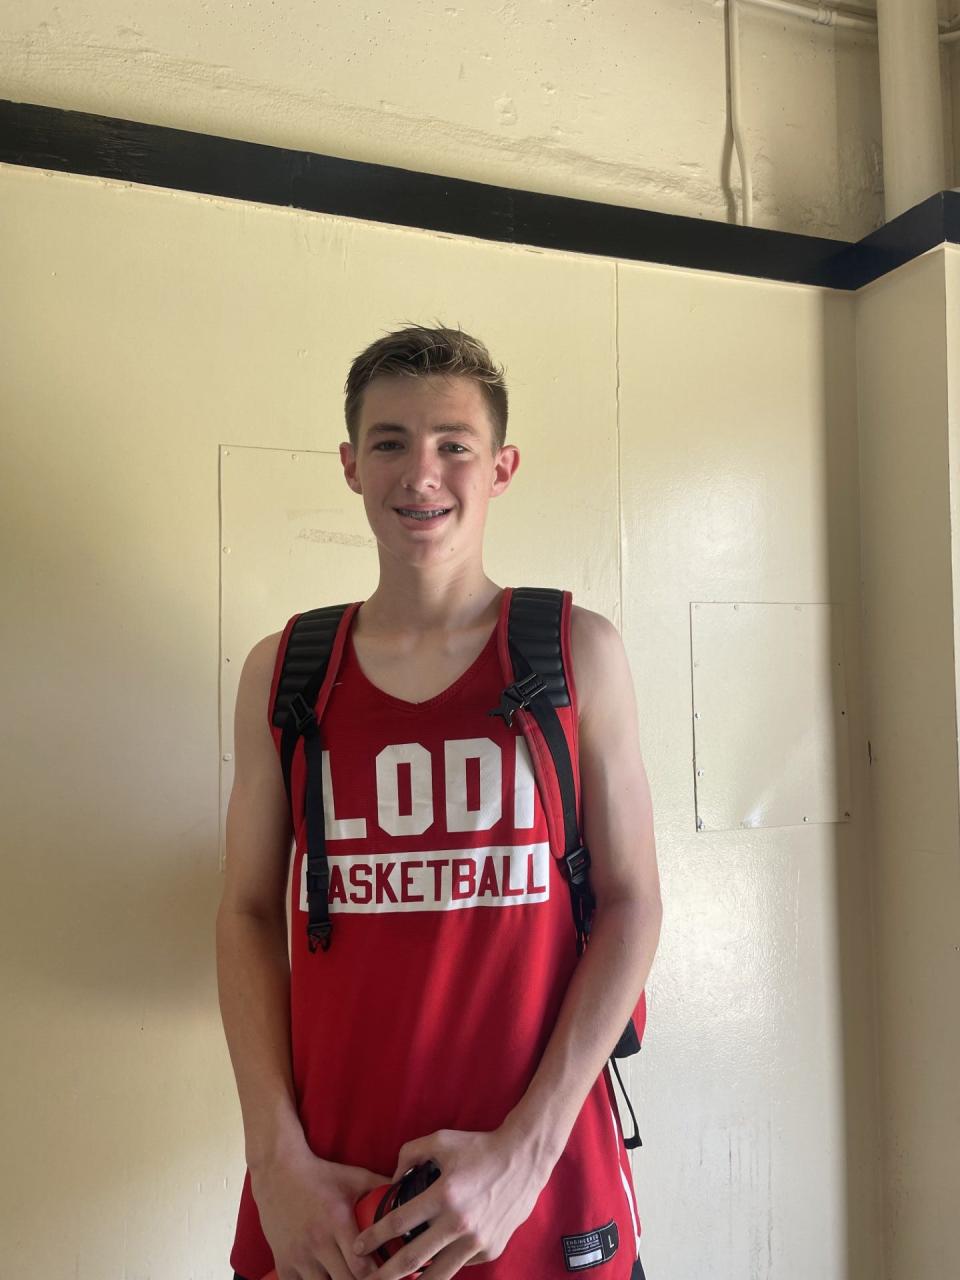 Nathan Morse of Lodi basketball poses for a photo after a game at Edison High School for the Modesto Christian Summer Classic.